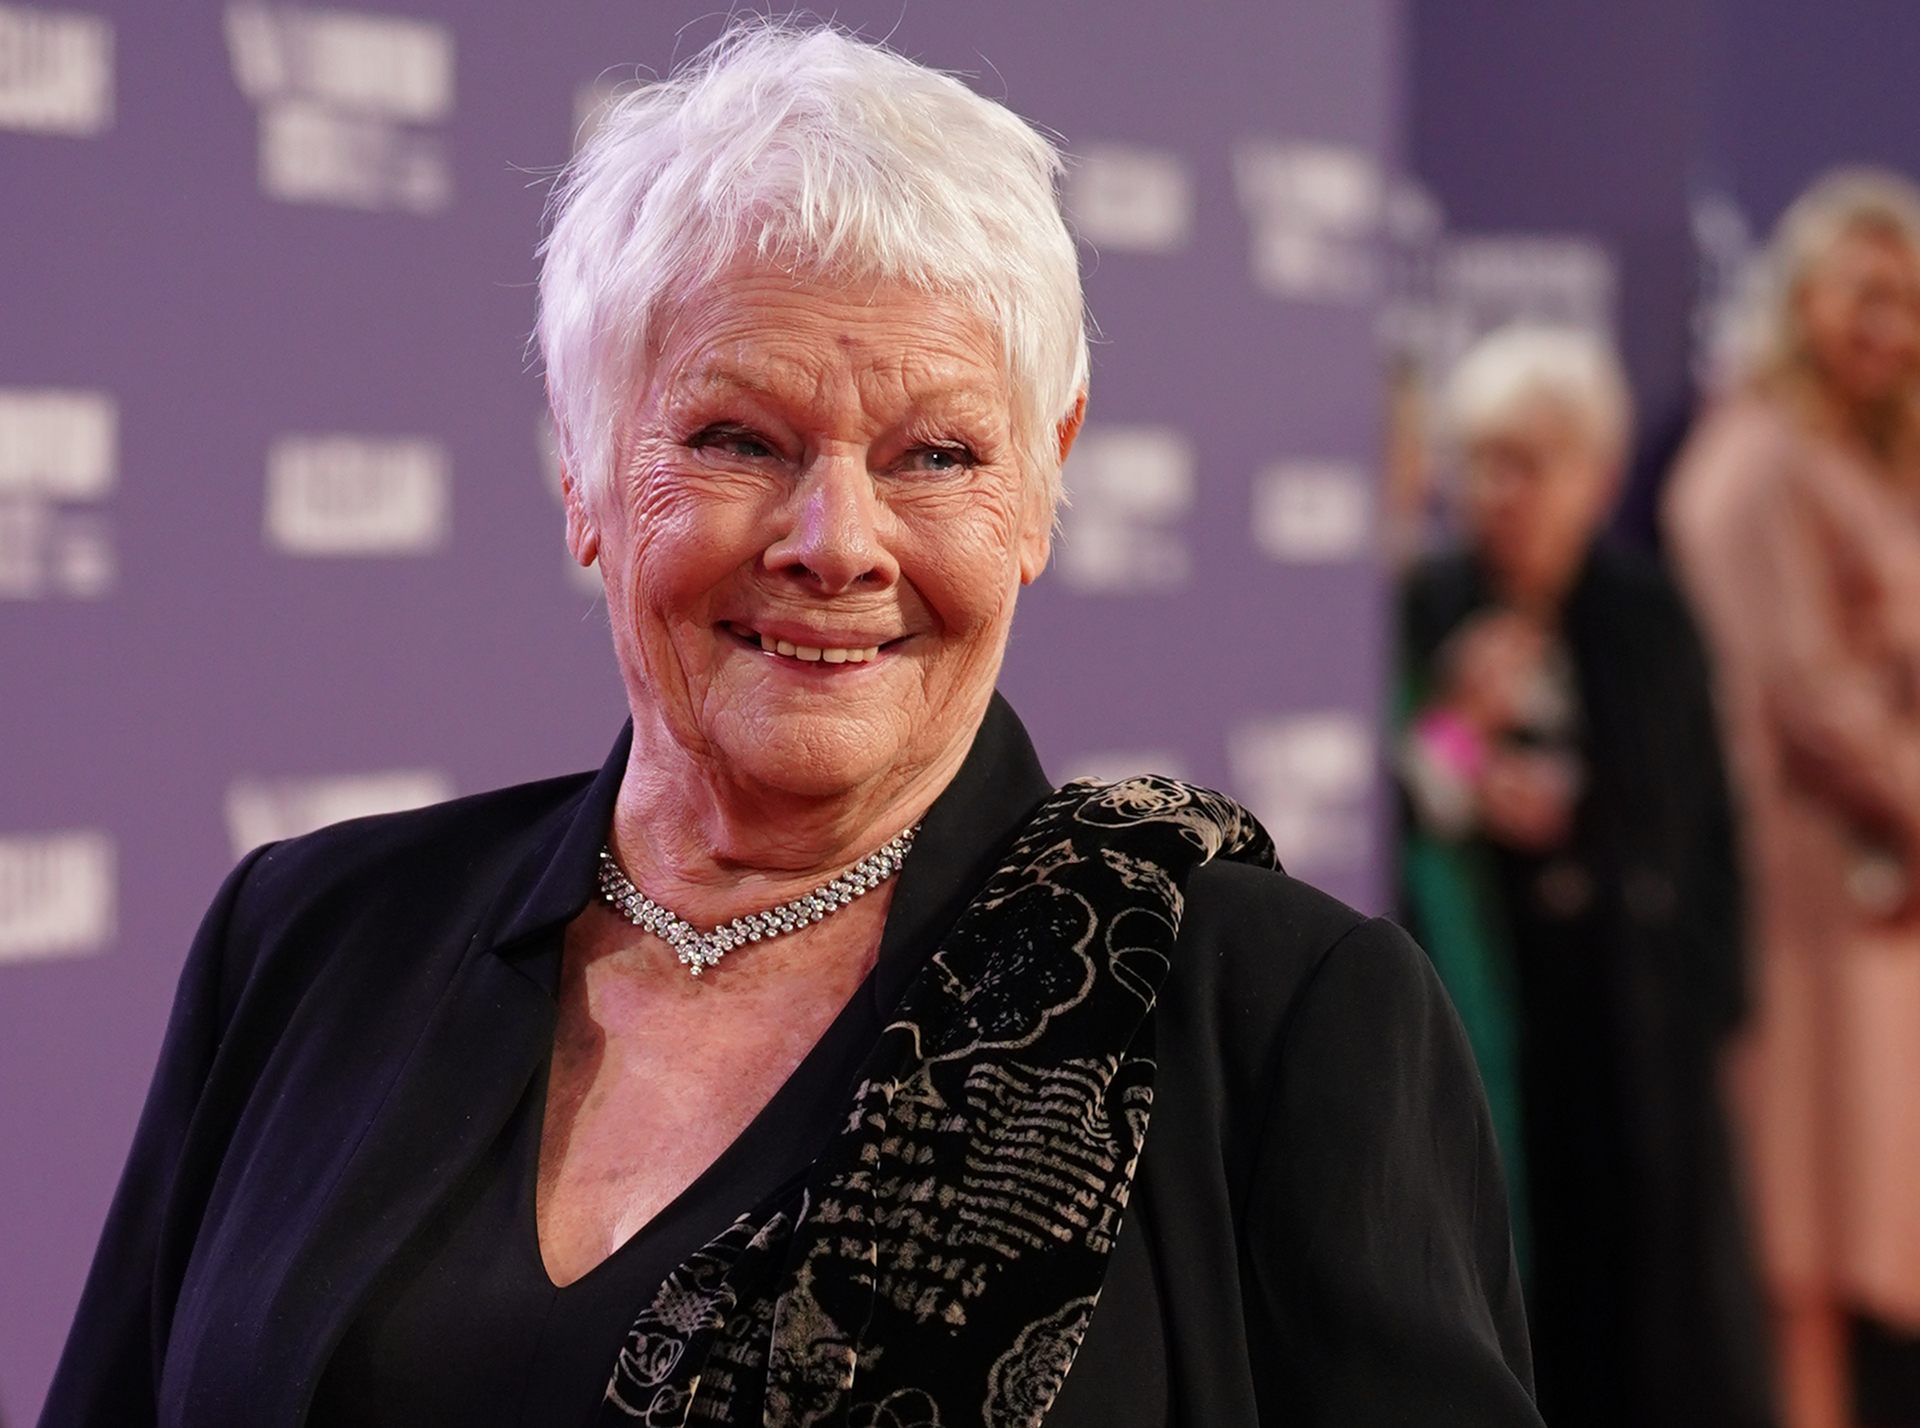 Dame Judi Dench has remembered Sir Michael Parkinson following his death aged 88.